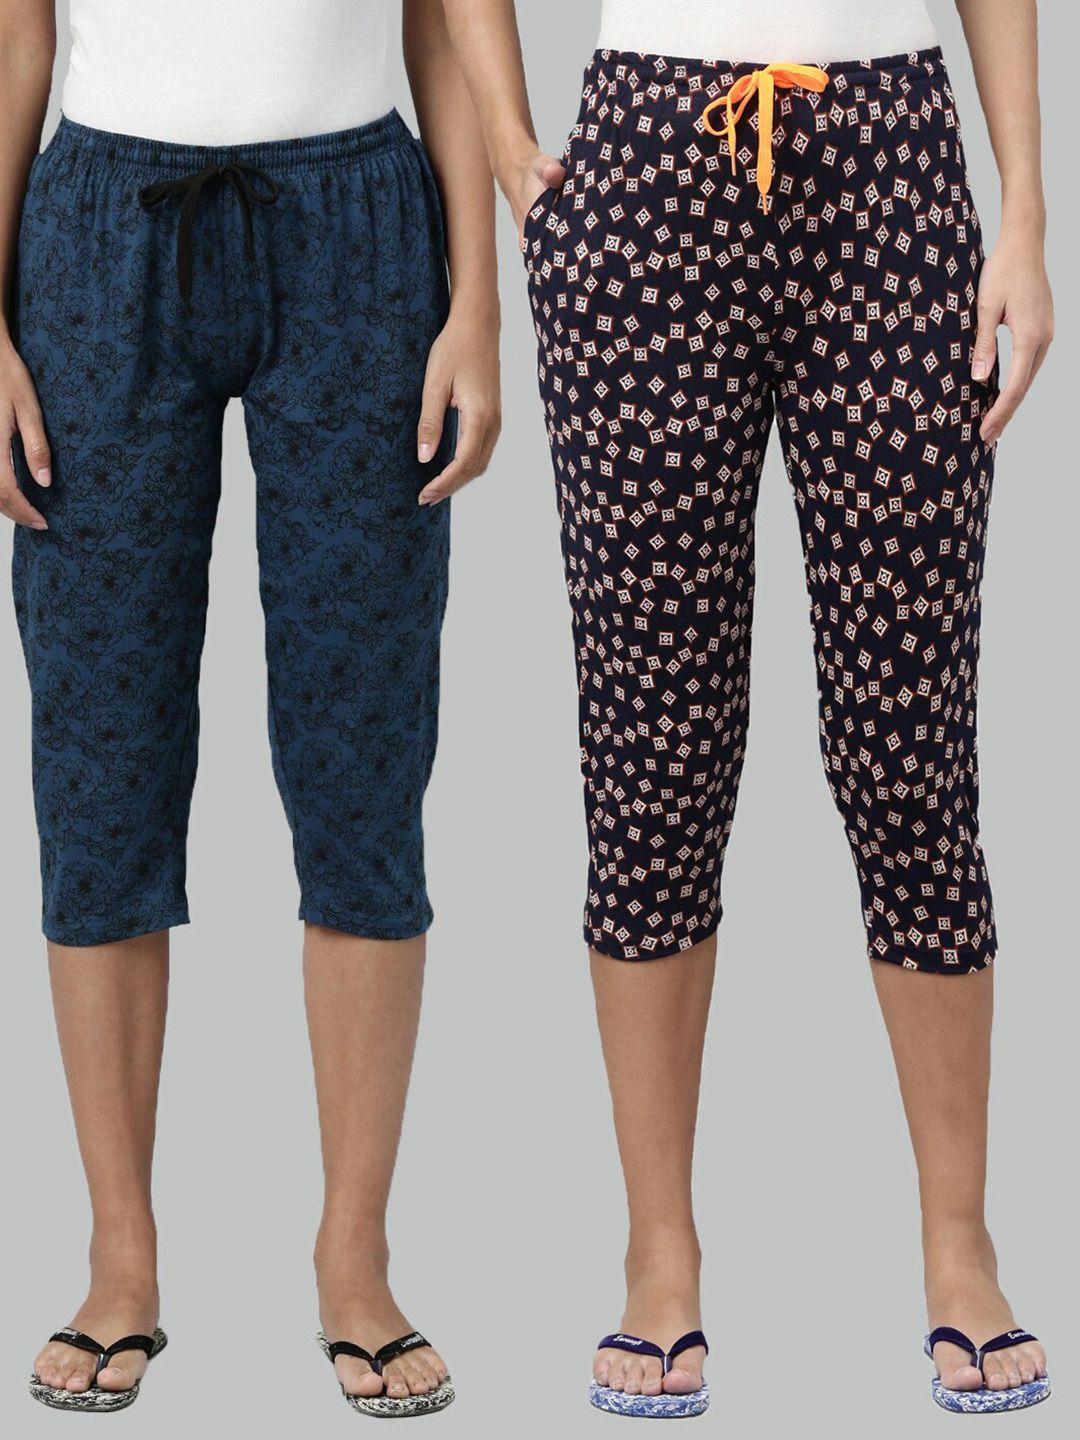 kryptic women pack of 2 teal blue & navy blue printed pure cotton lounge capris